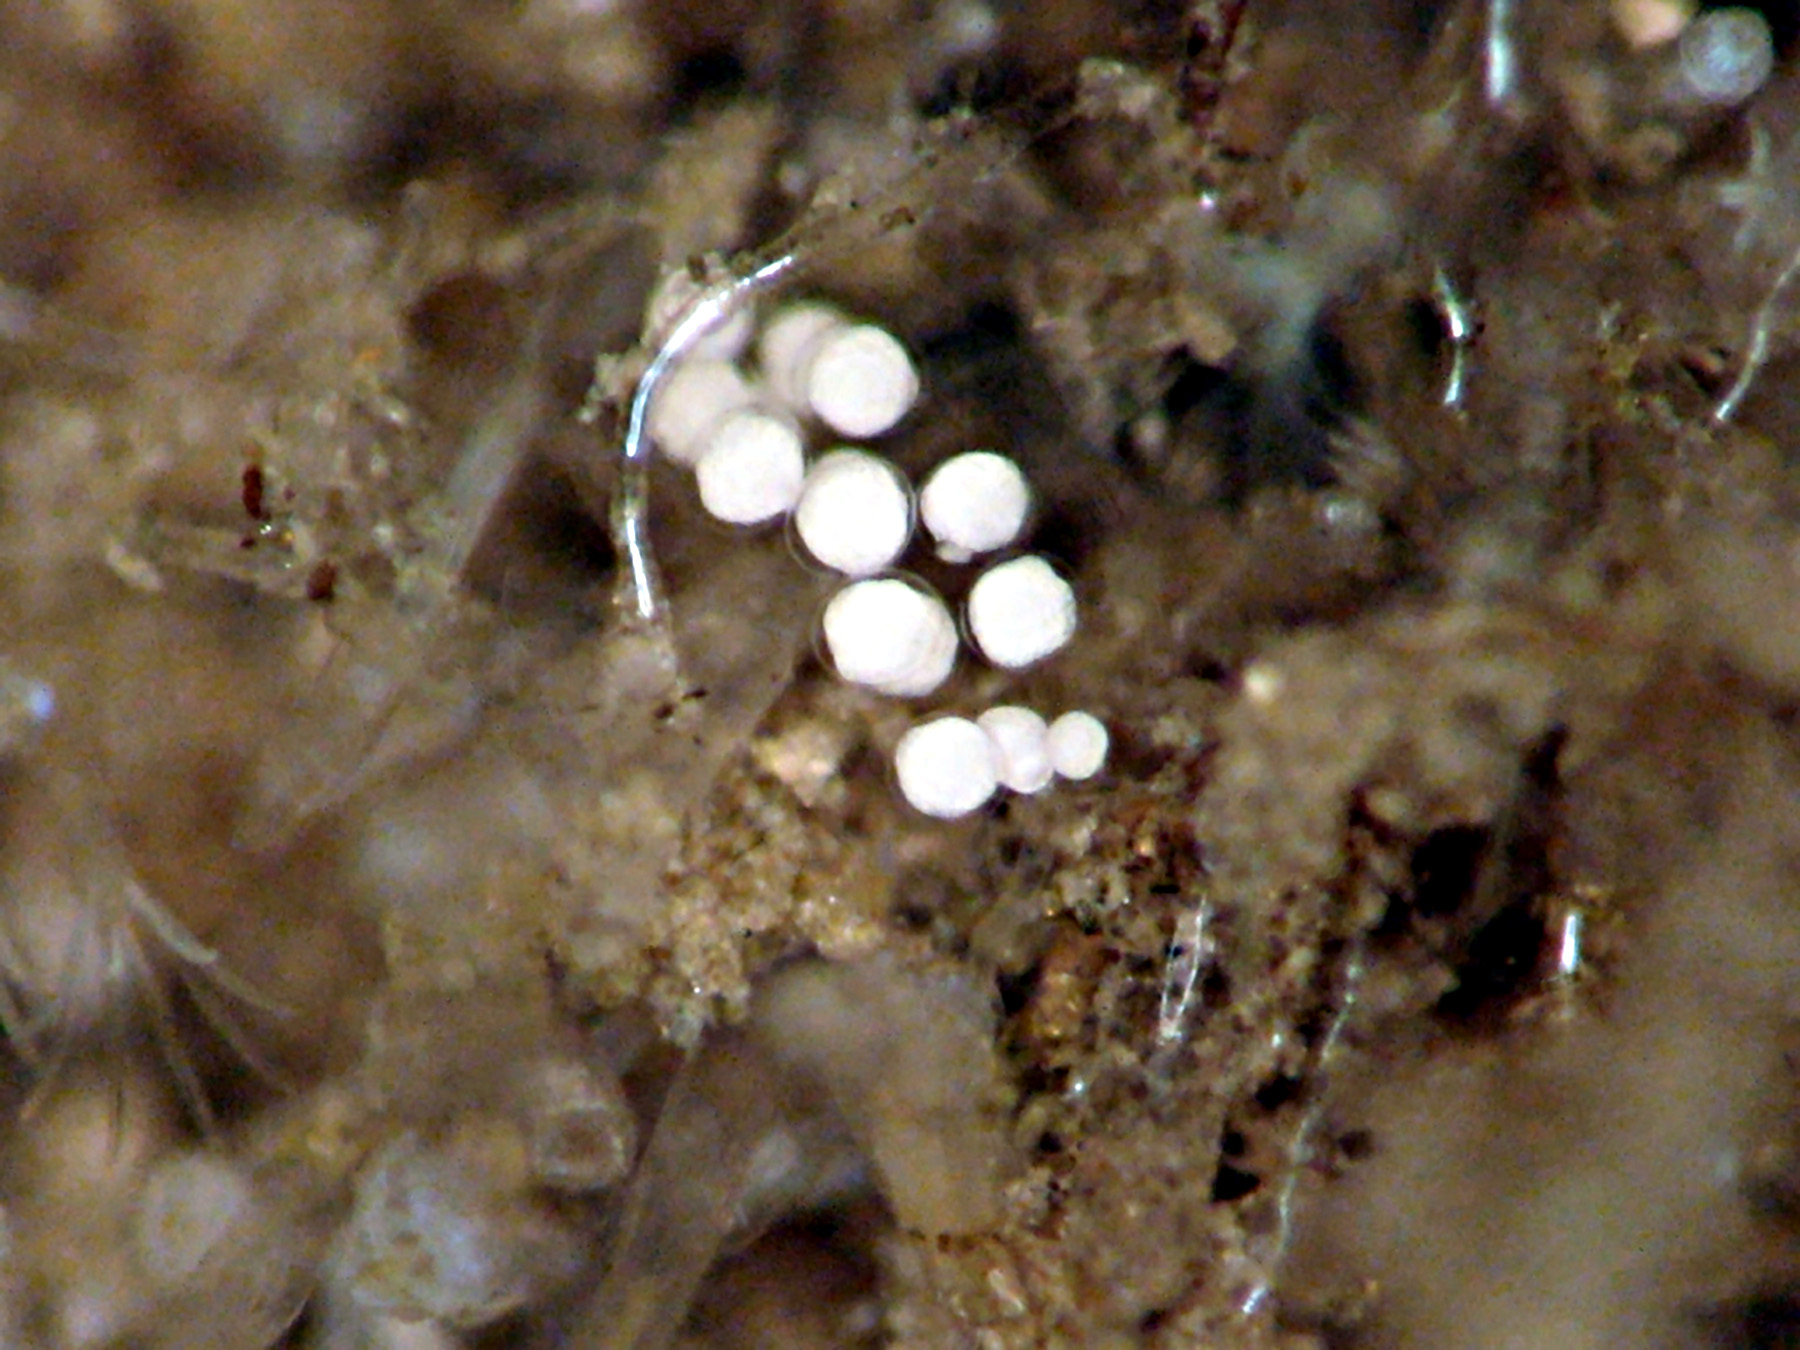 A clear gel with 11 visible white spheres